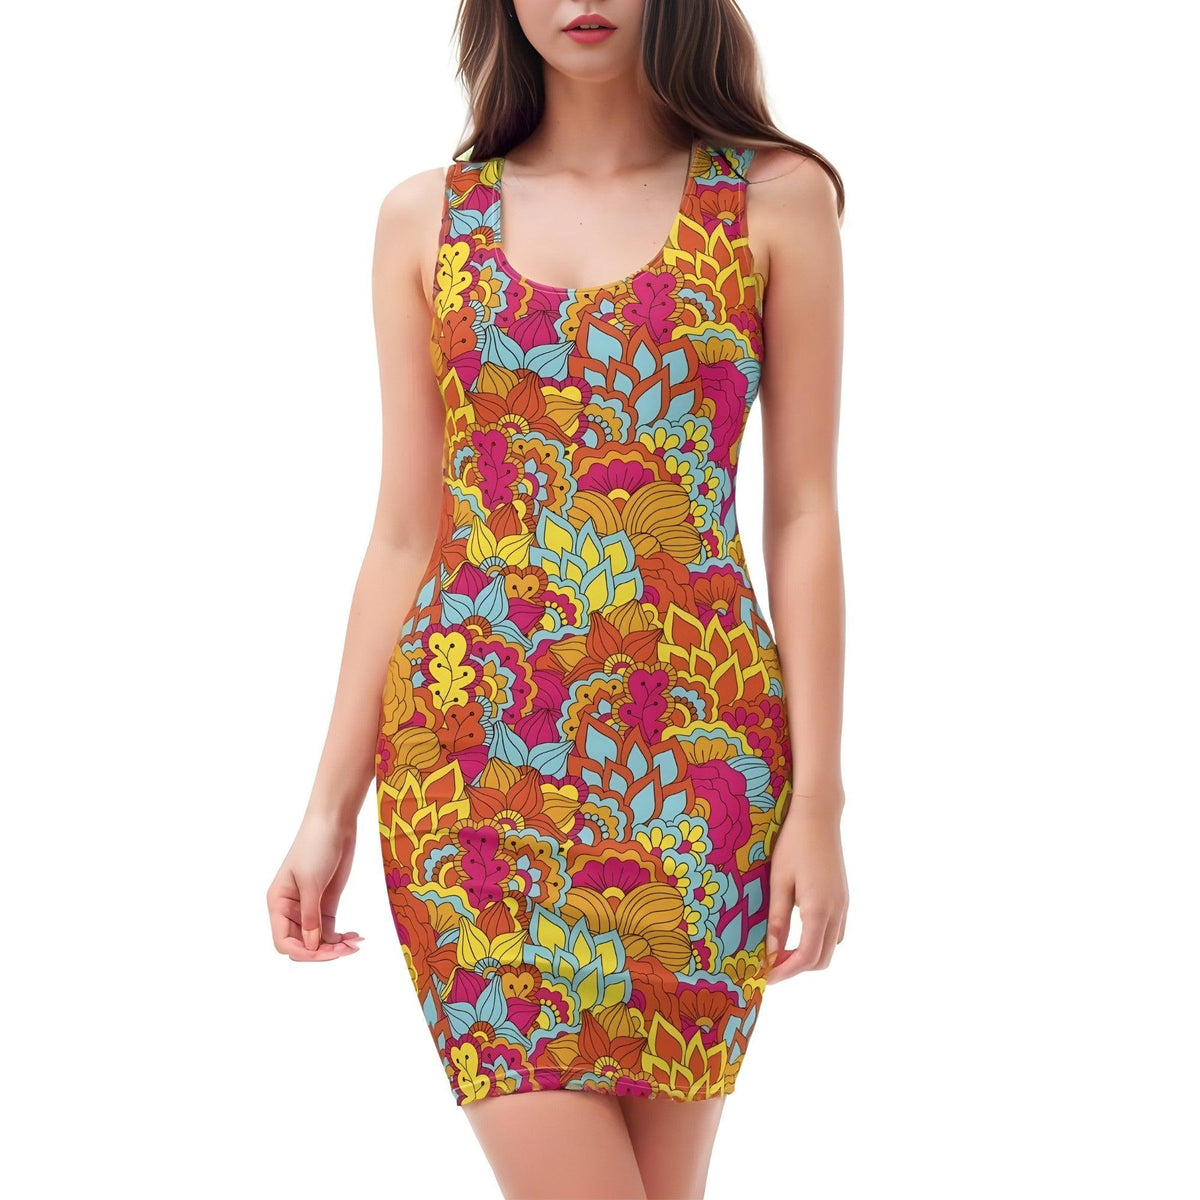 Inela Bodycon dress - Flower Power Paisley Print - Red - Yellow - Pink - Psychedelic Retro Bold Vibrant - Funky Mini Fitted